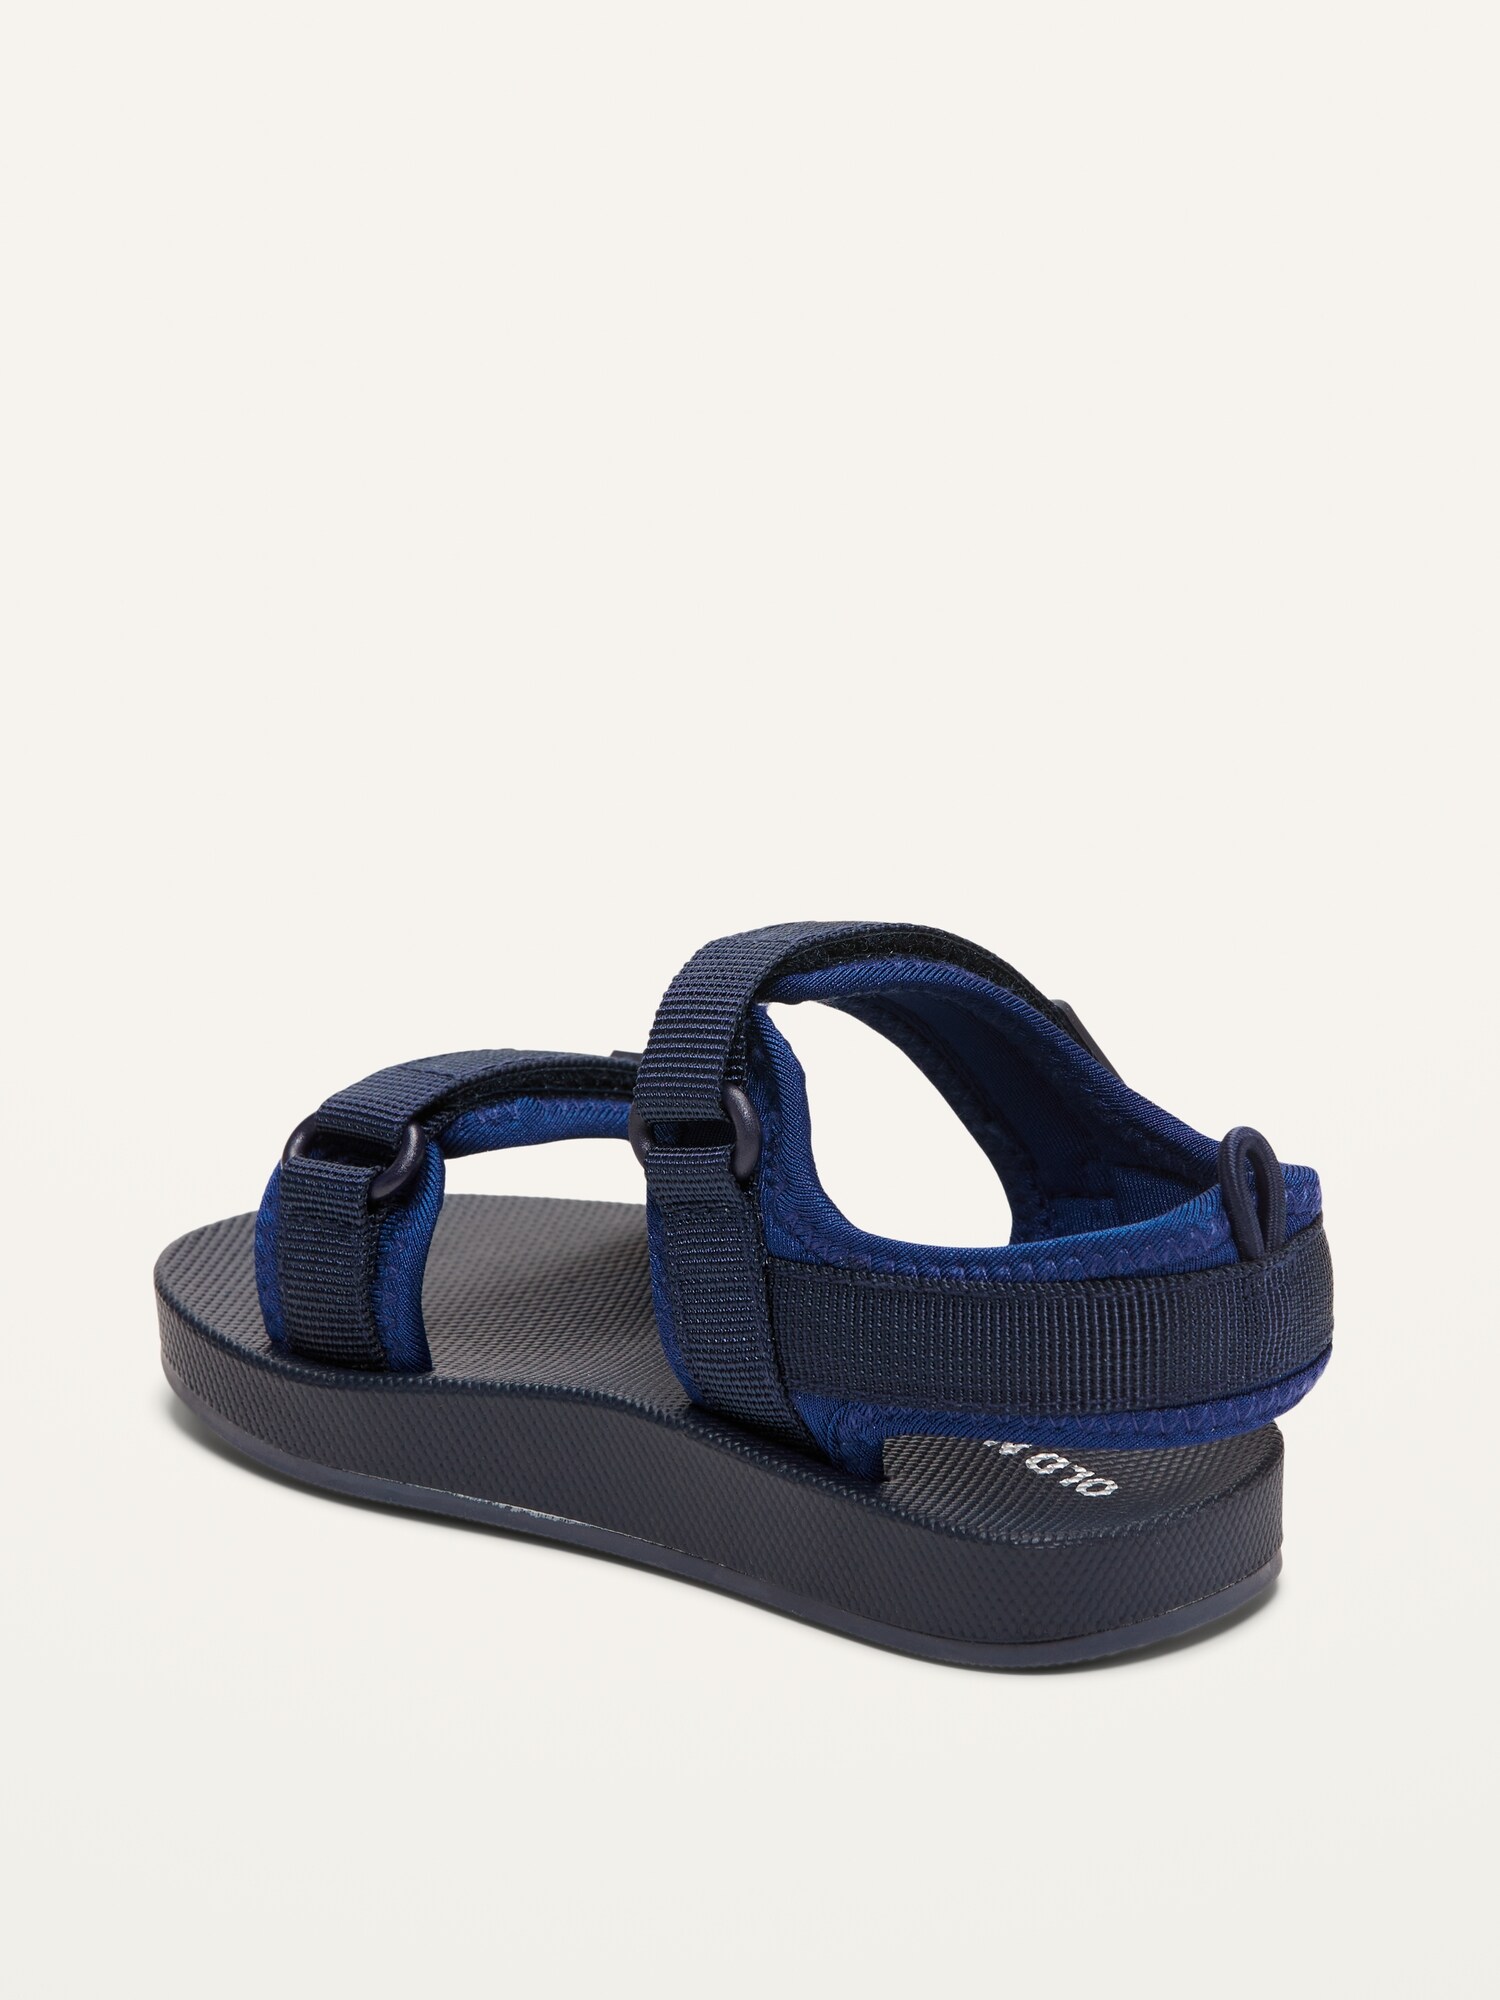 Double-Strap Sandals for Toddler Boys | Old Navy